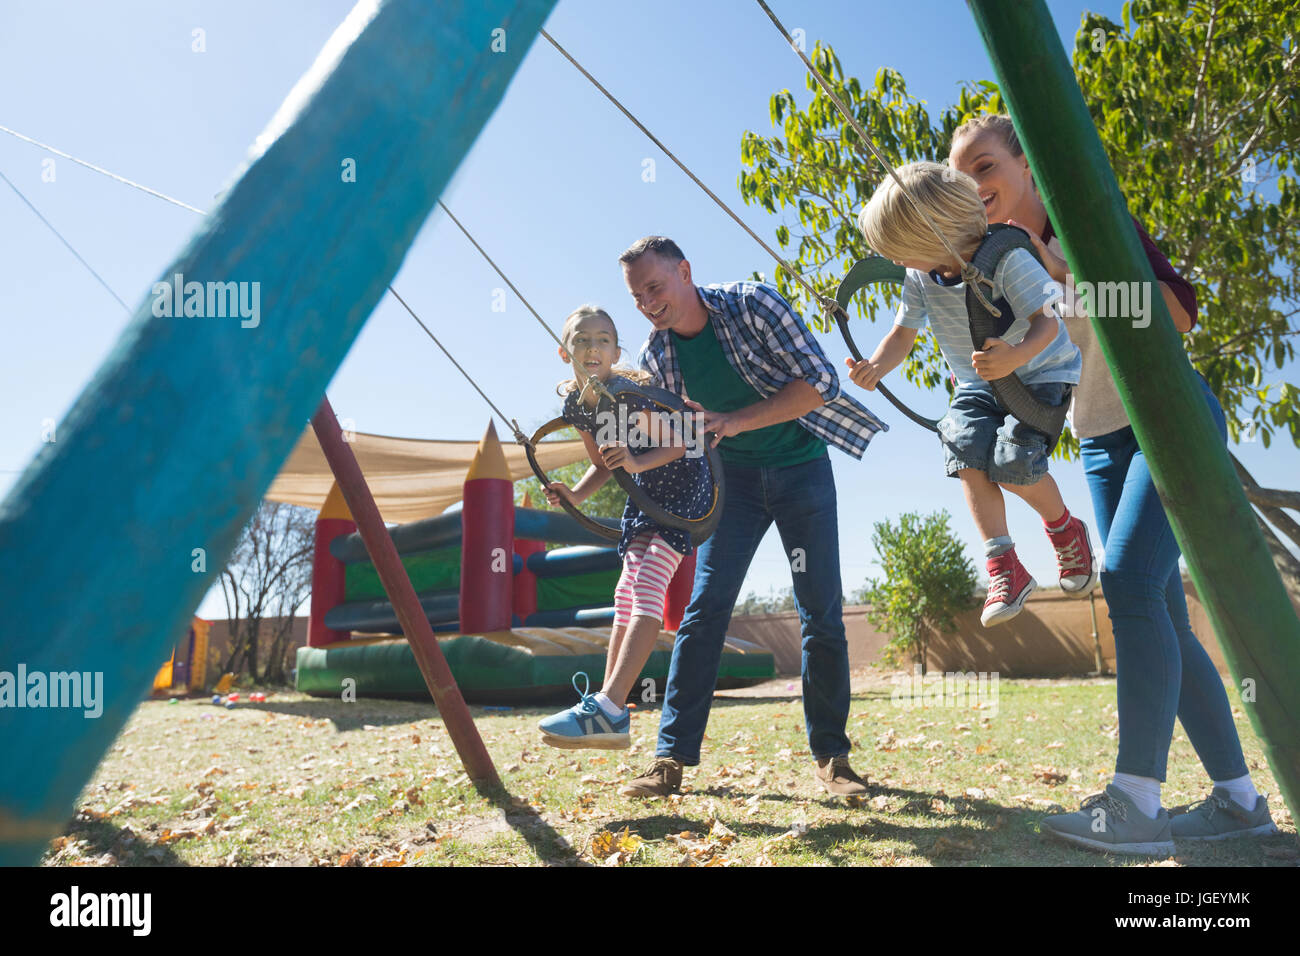 Playful parents swinging children at playground during sunny day Stock Photo